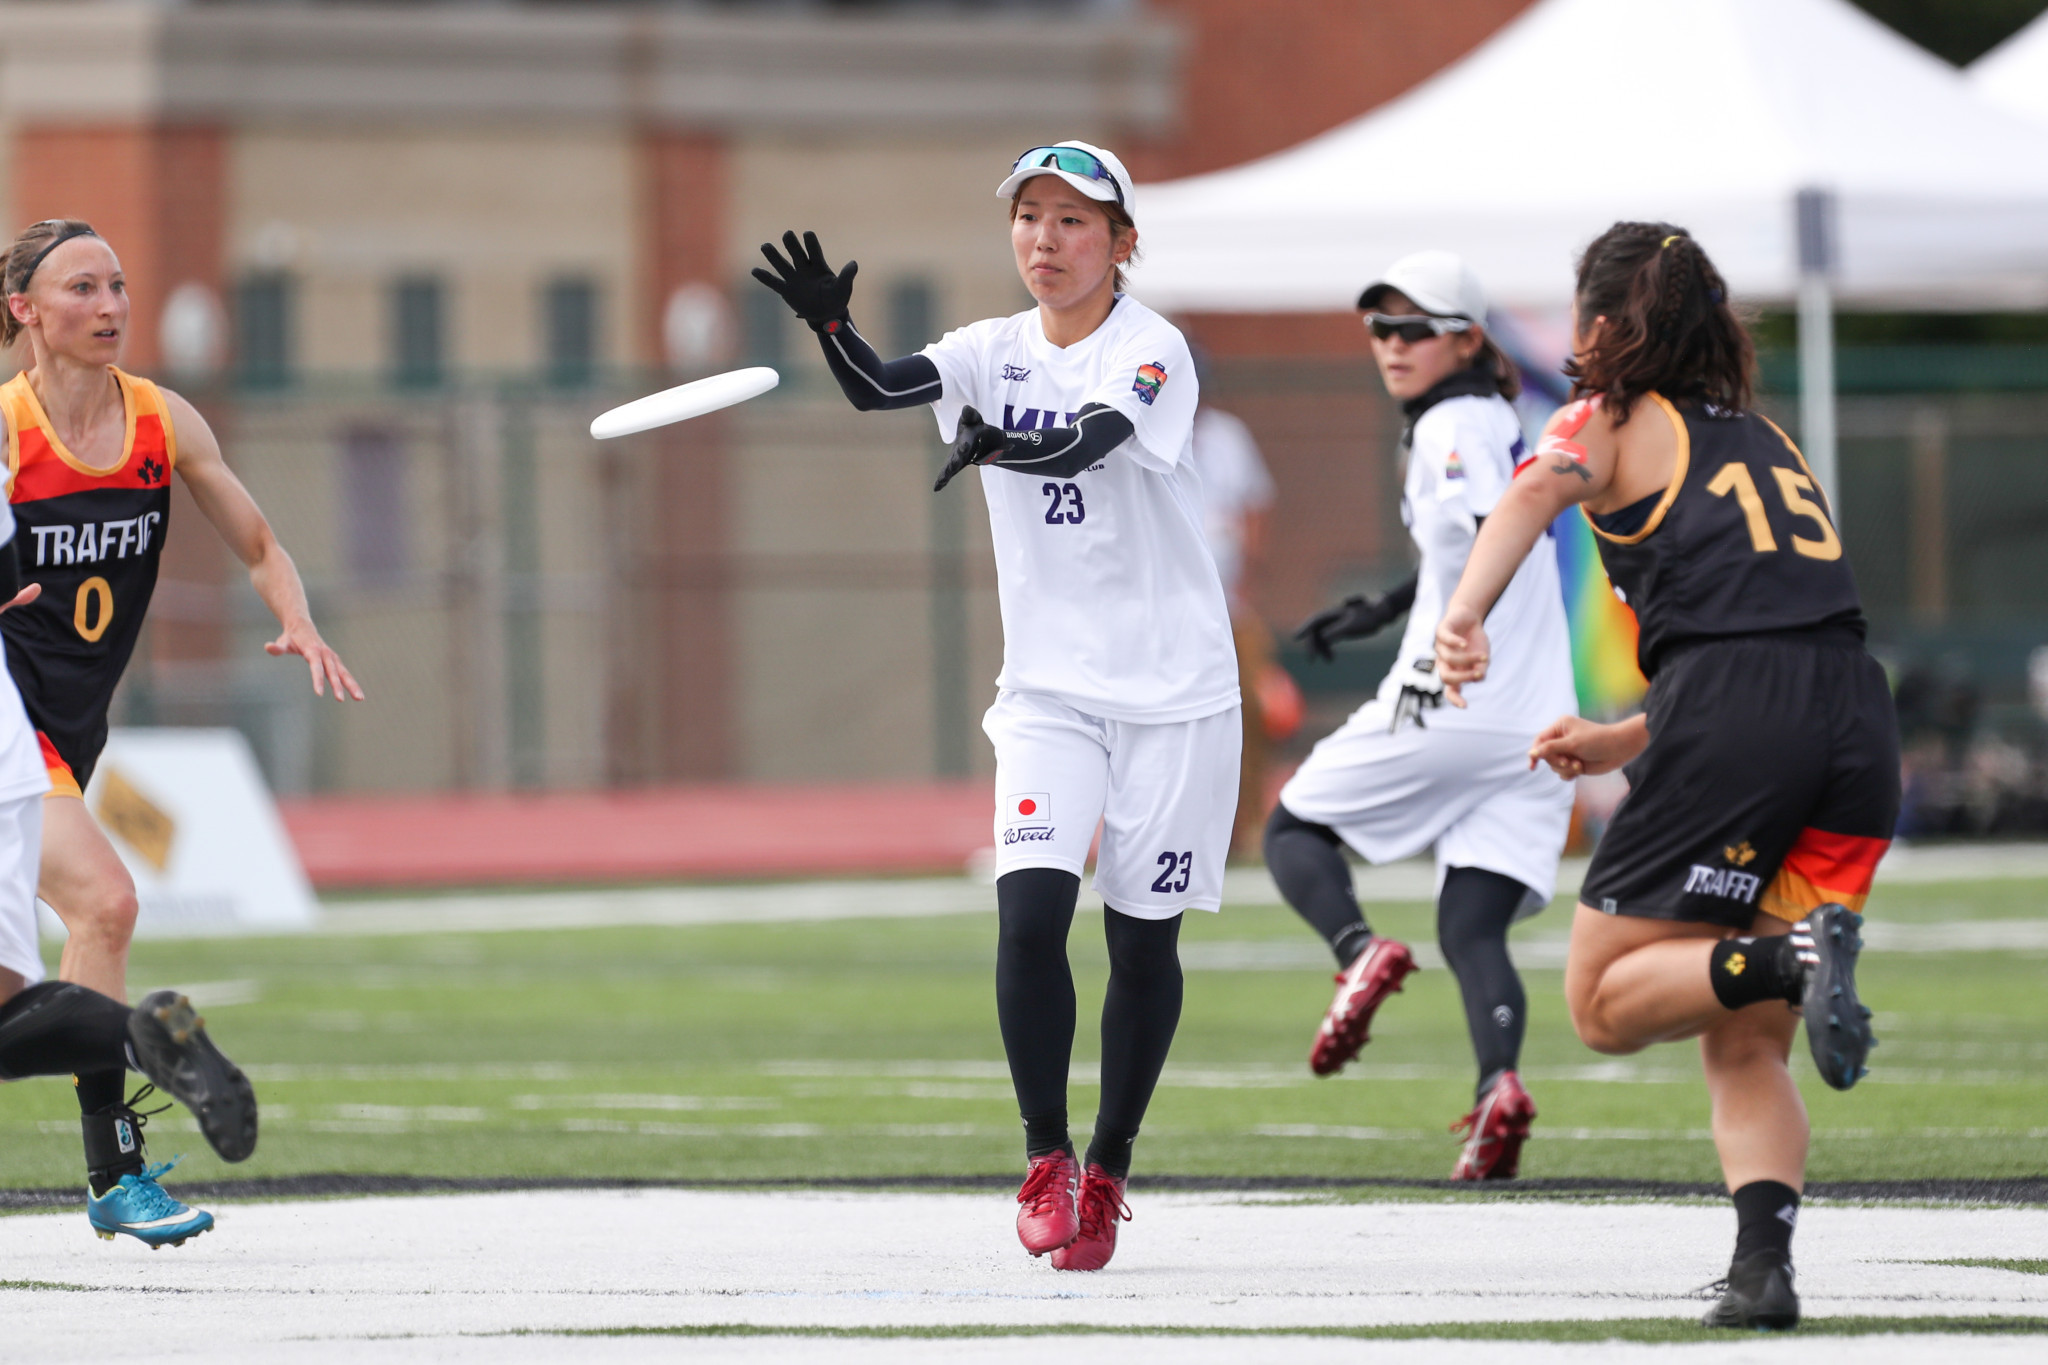 Asako Takaura, centre, played her role in MUD's victory against Traffic ©Paul Rutherford for Ultiphotos